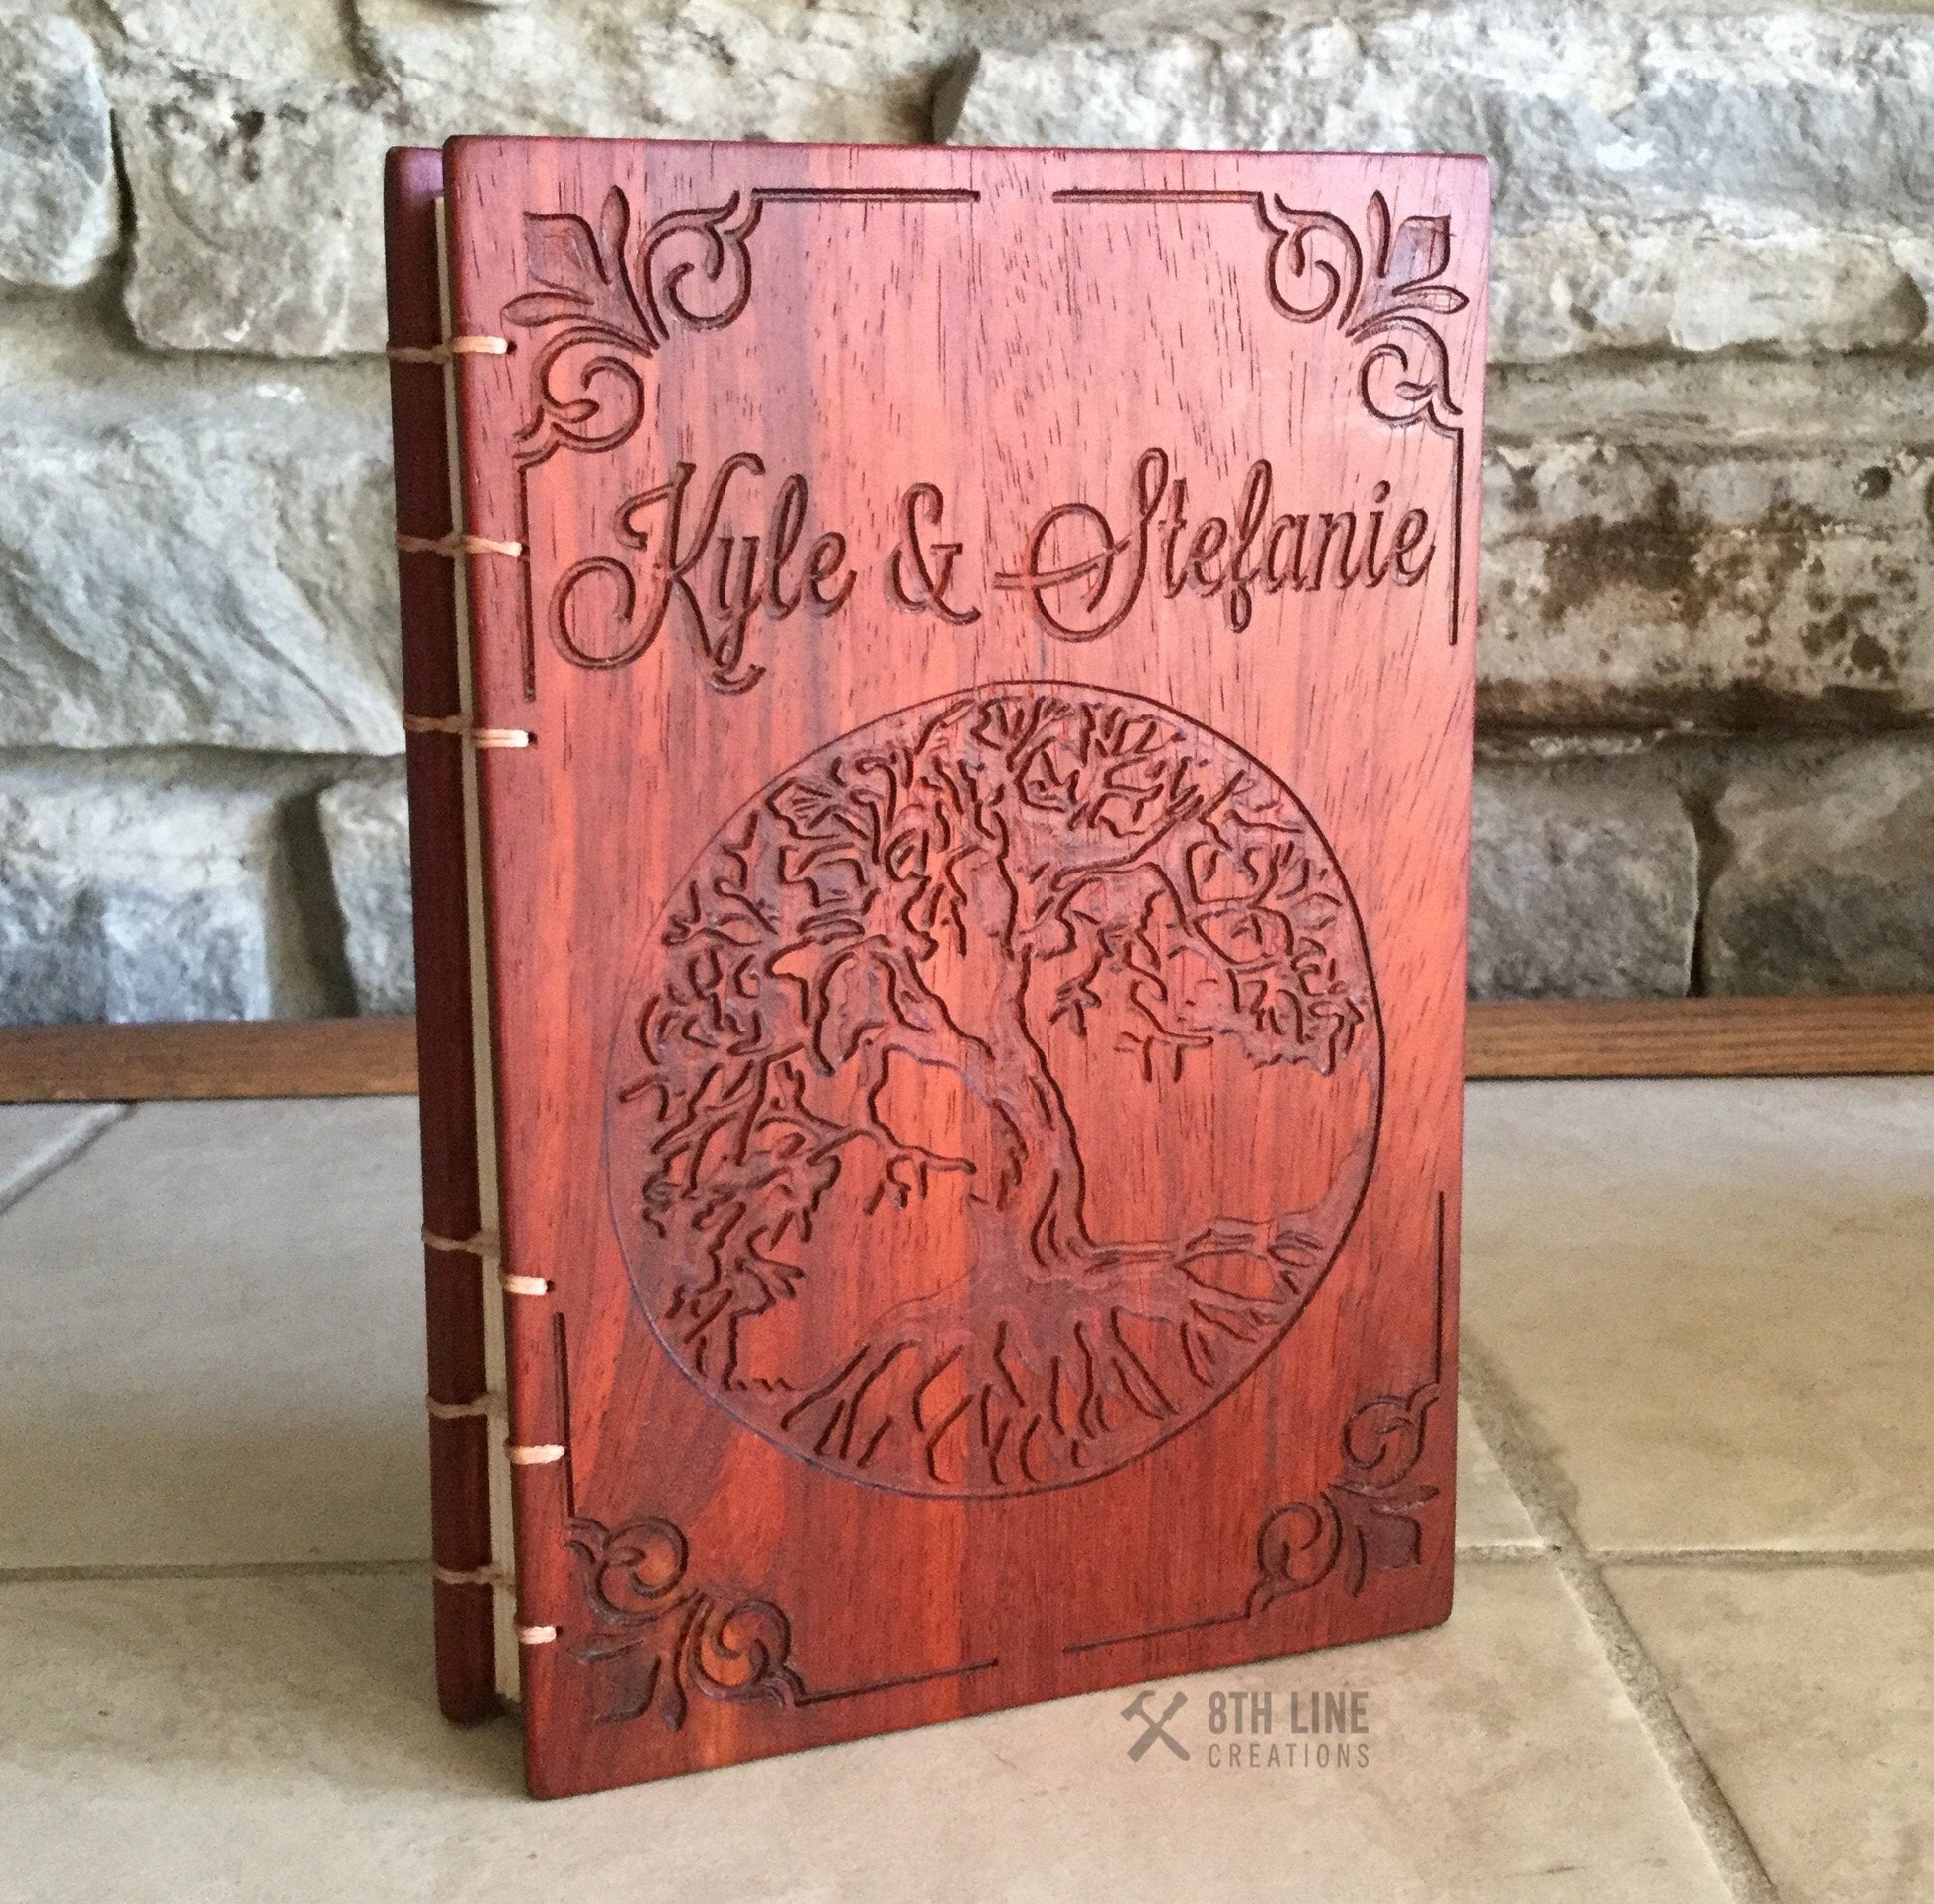 https://8thlinecreations.com/cdn/shop/products/personalized-journal-tree-of-lifediaries-mothers-day-gift-wooden-booknotebooks-personal-diary-unique-gifts-s-poplar-coptic-stitch-custom-carved-diaries-guest-books-journa-733990.jpg?v=1702308536&width=1946